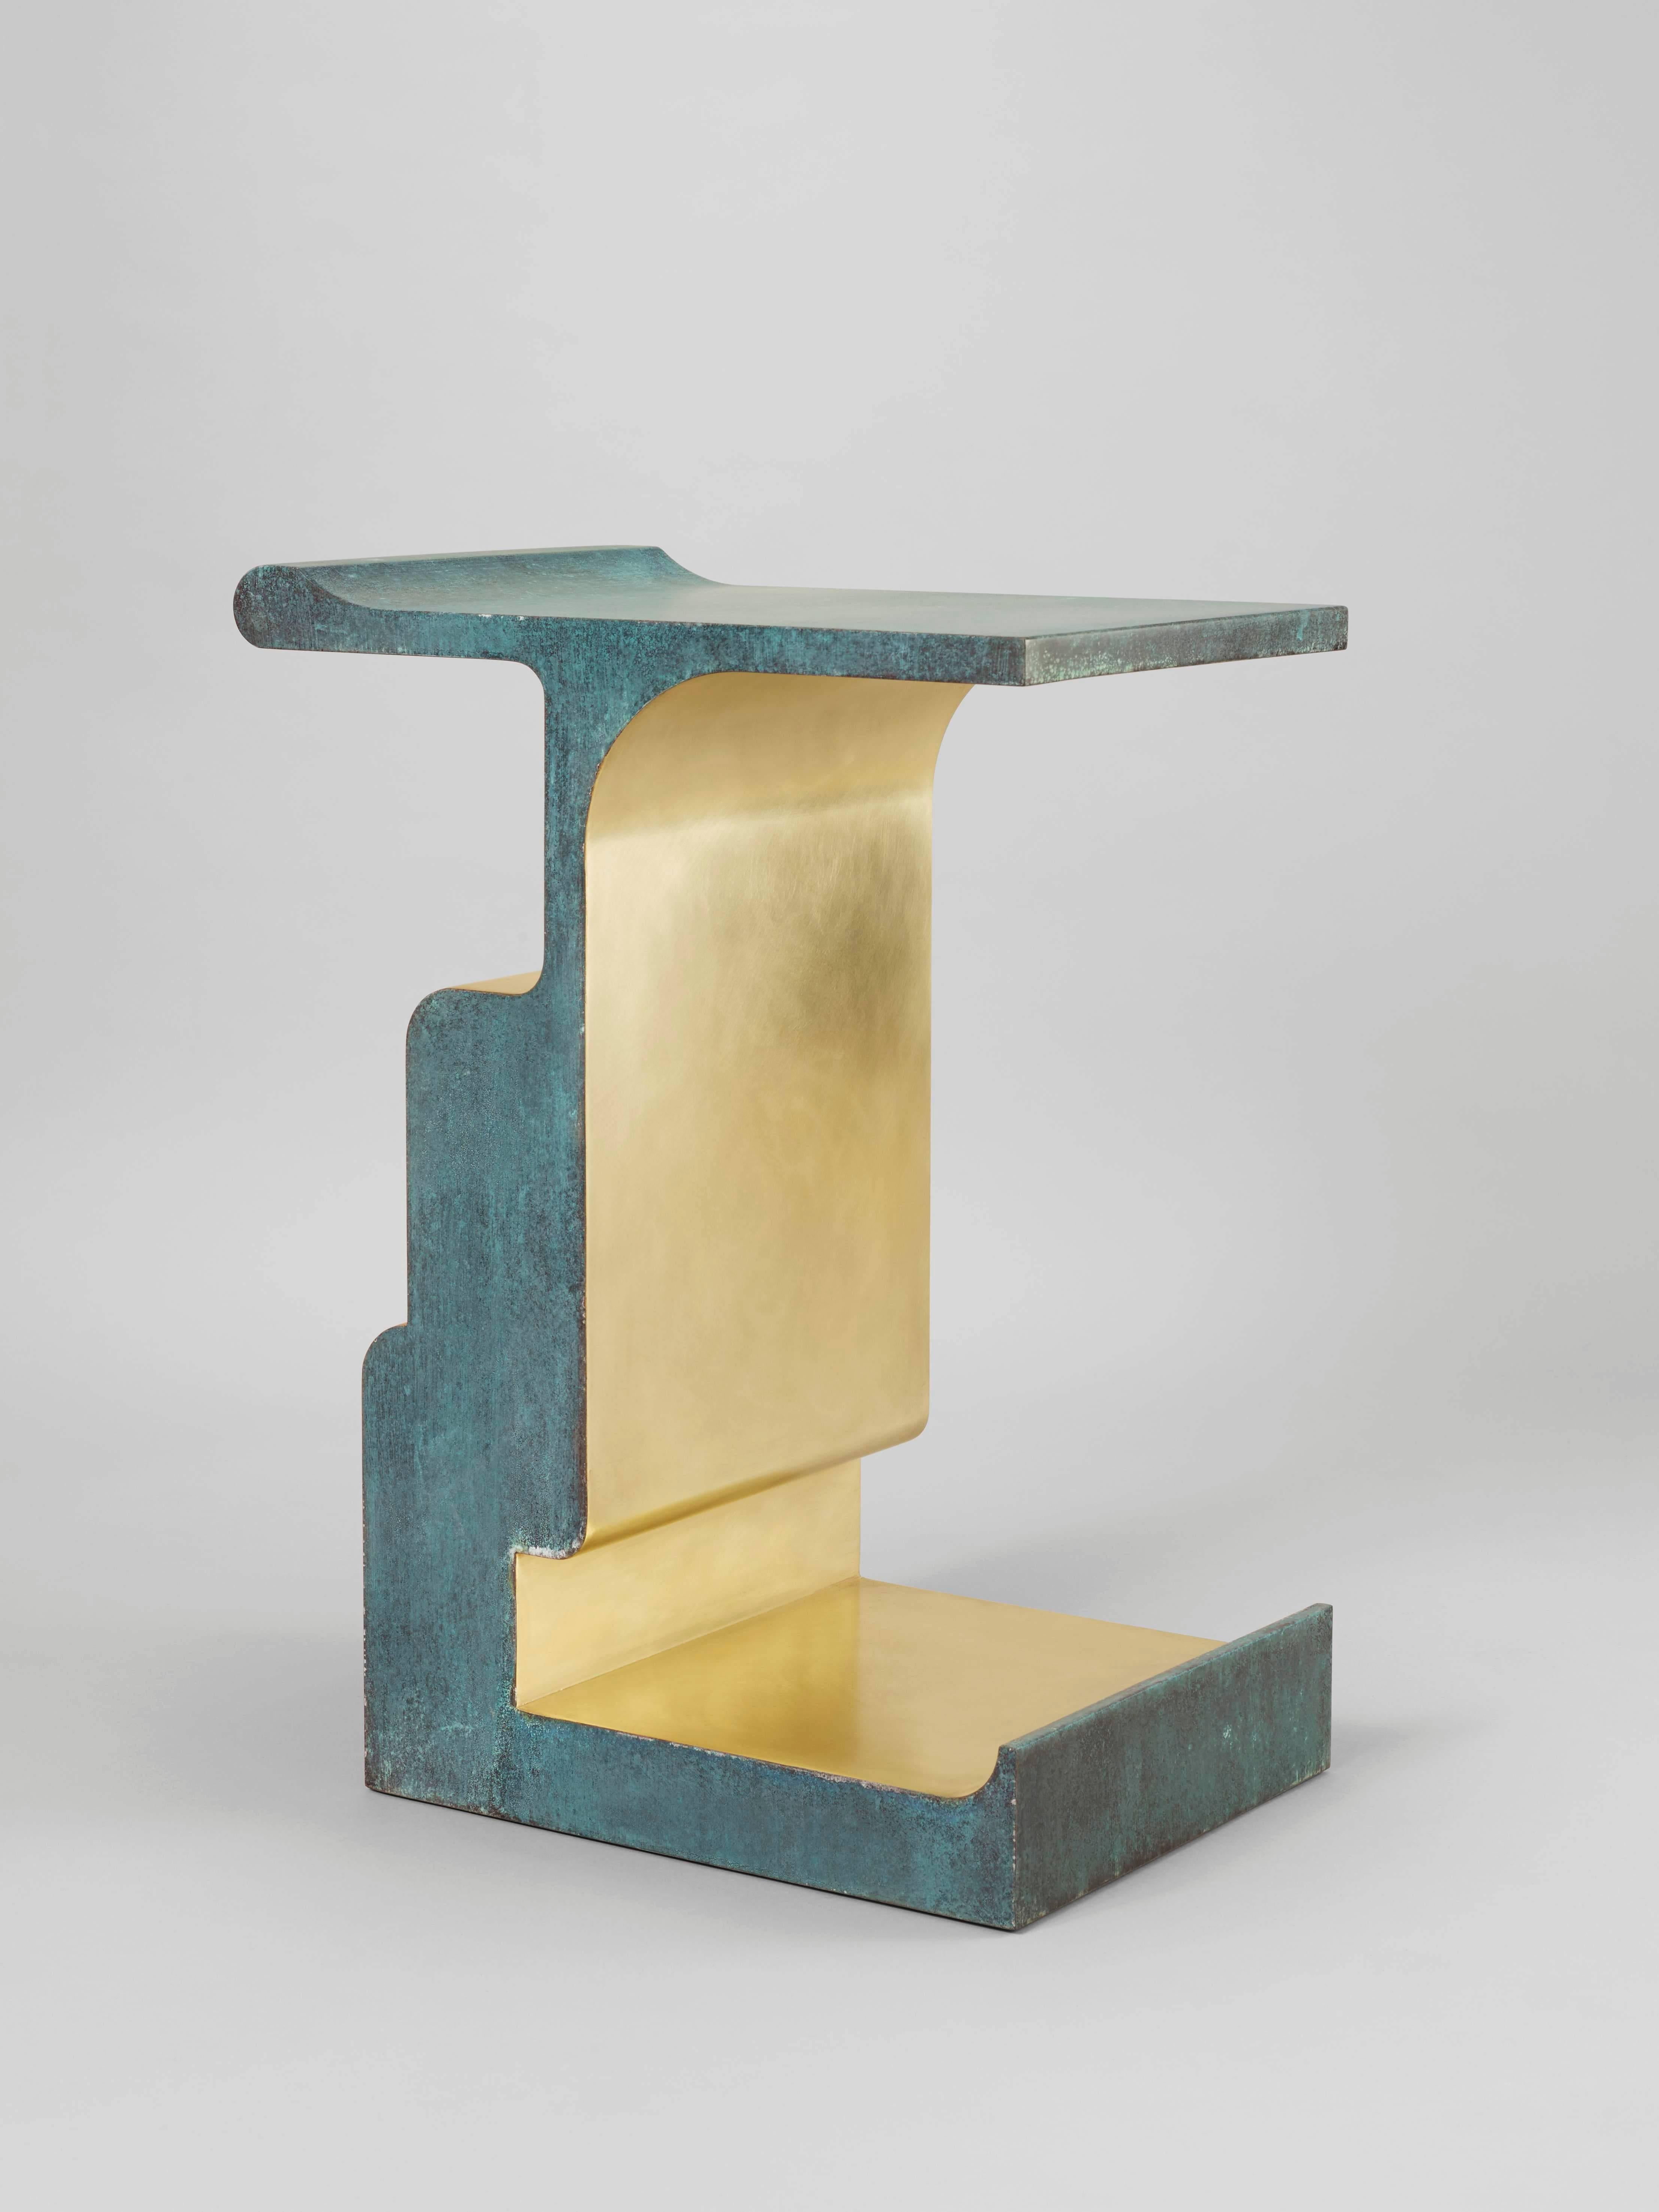 ‘XiangSheng Side Table #2' is an art furniture piece in oxidized and brushed bronze that celebrates the interplay between structural form and space. It is part of the ‘XiangSheng’ furniture collection by acclaimed studio Design MVW, founded in